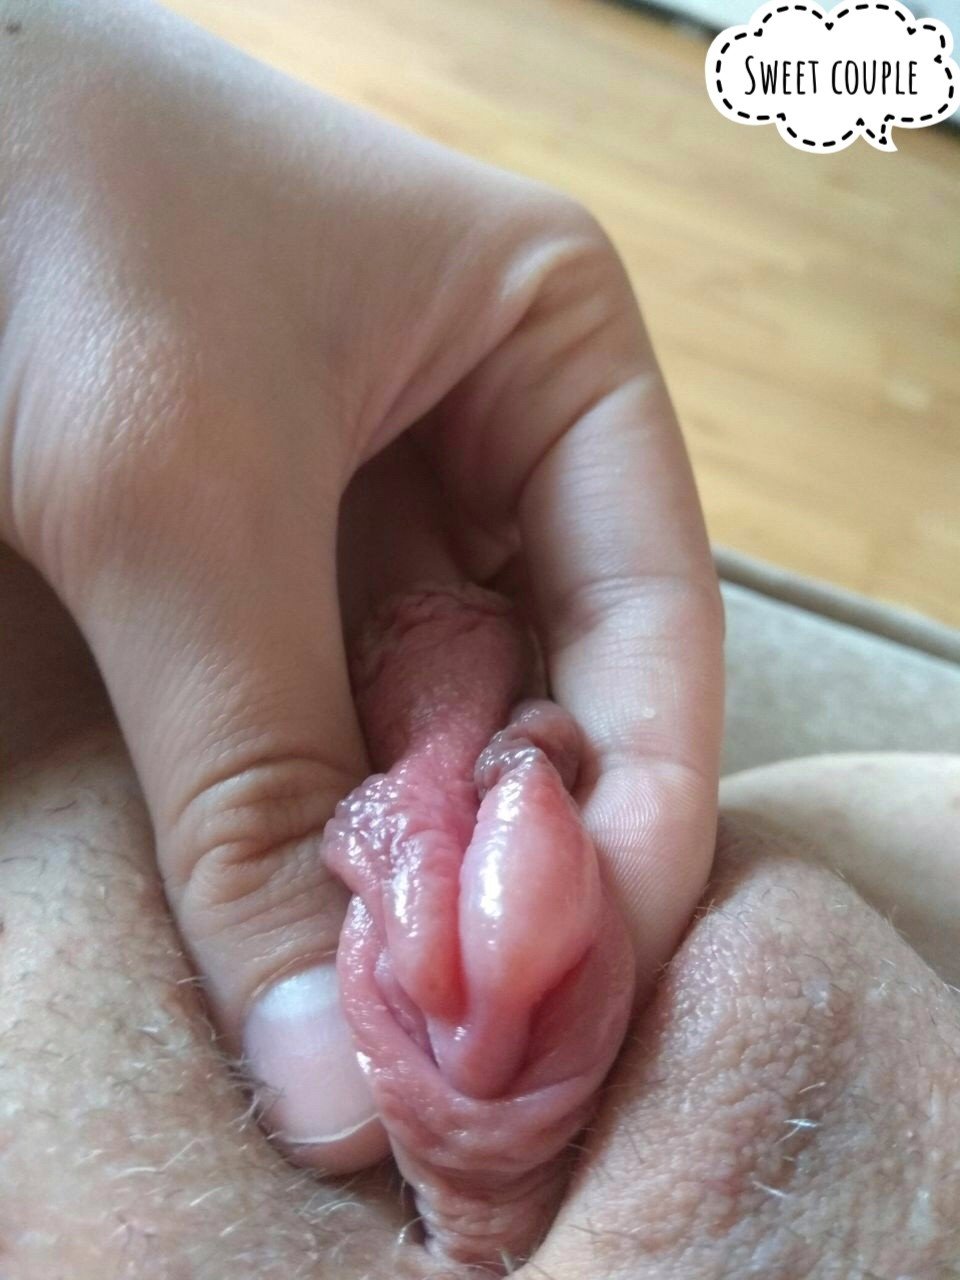 Watch the Photo by Sweet couple with the username @75kurilka, posted on September 6, 2020. The post is about the topic Love tricks. and the text says 'after the pump
#pumping #pussypump #mypussy #bigpussy'